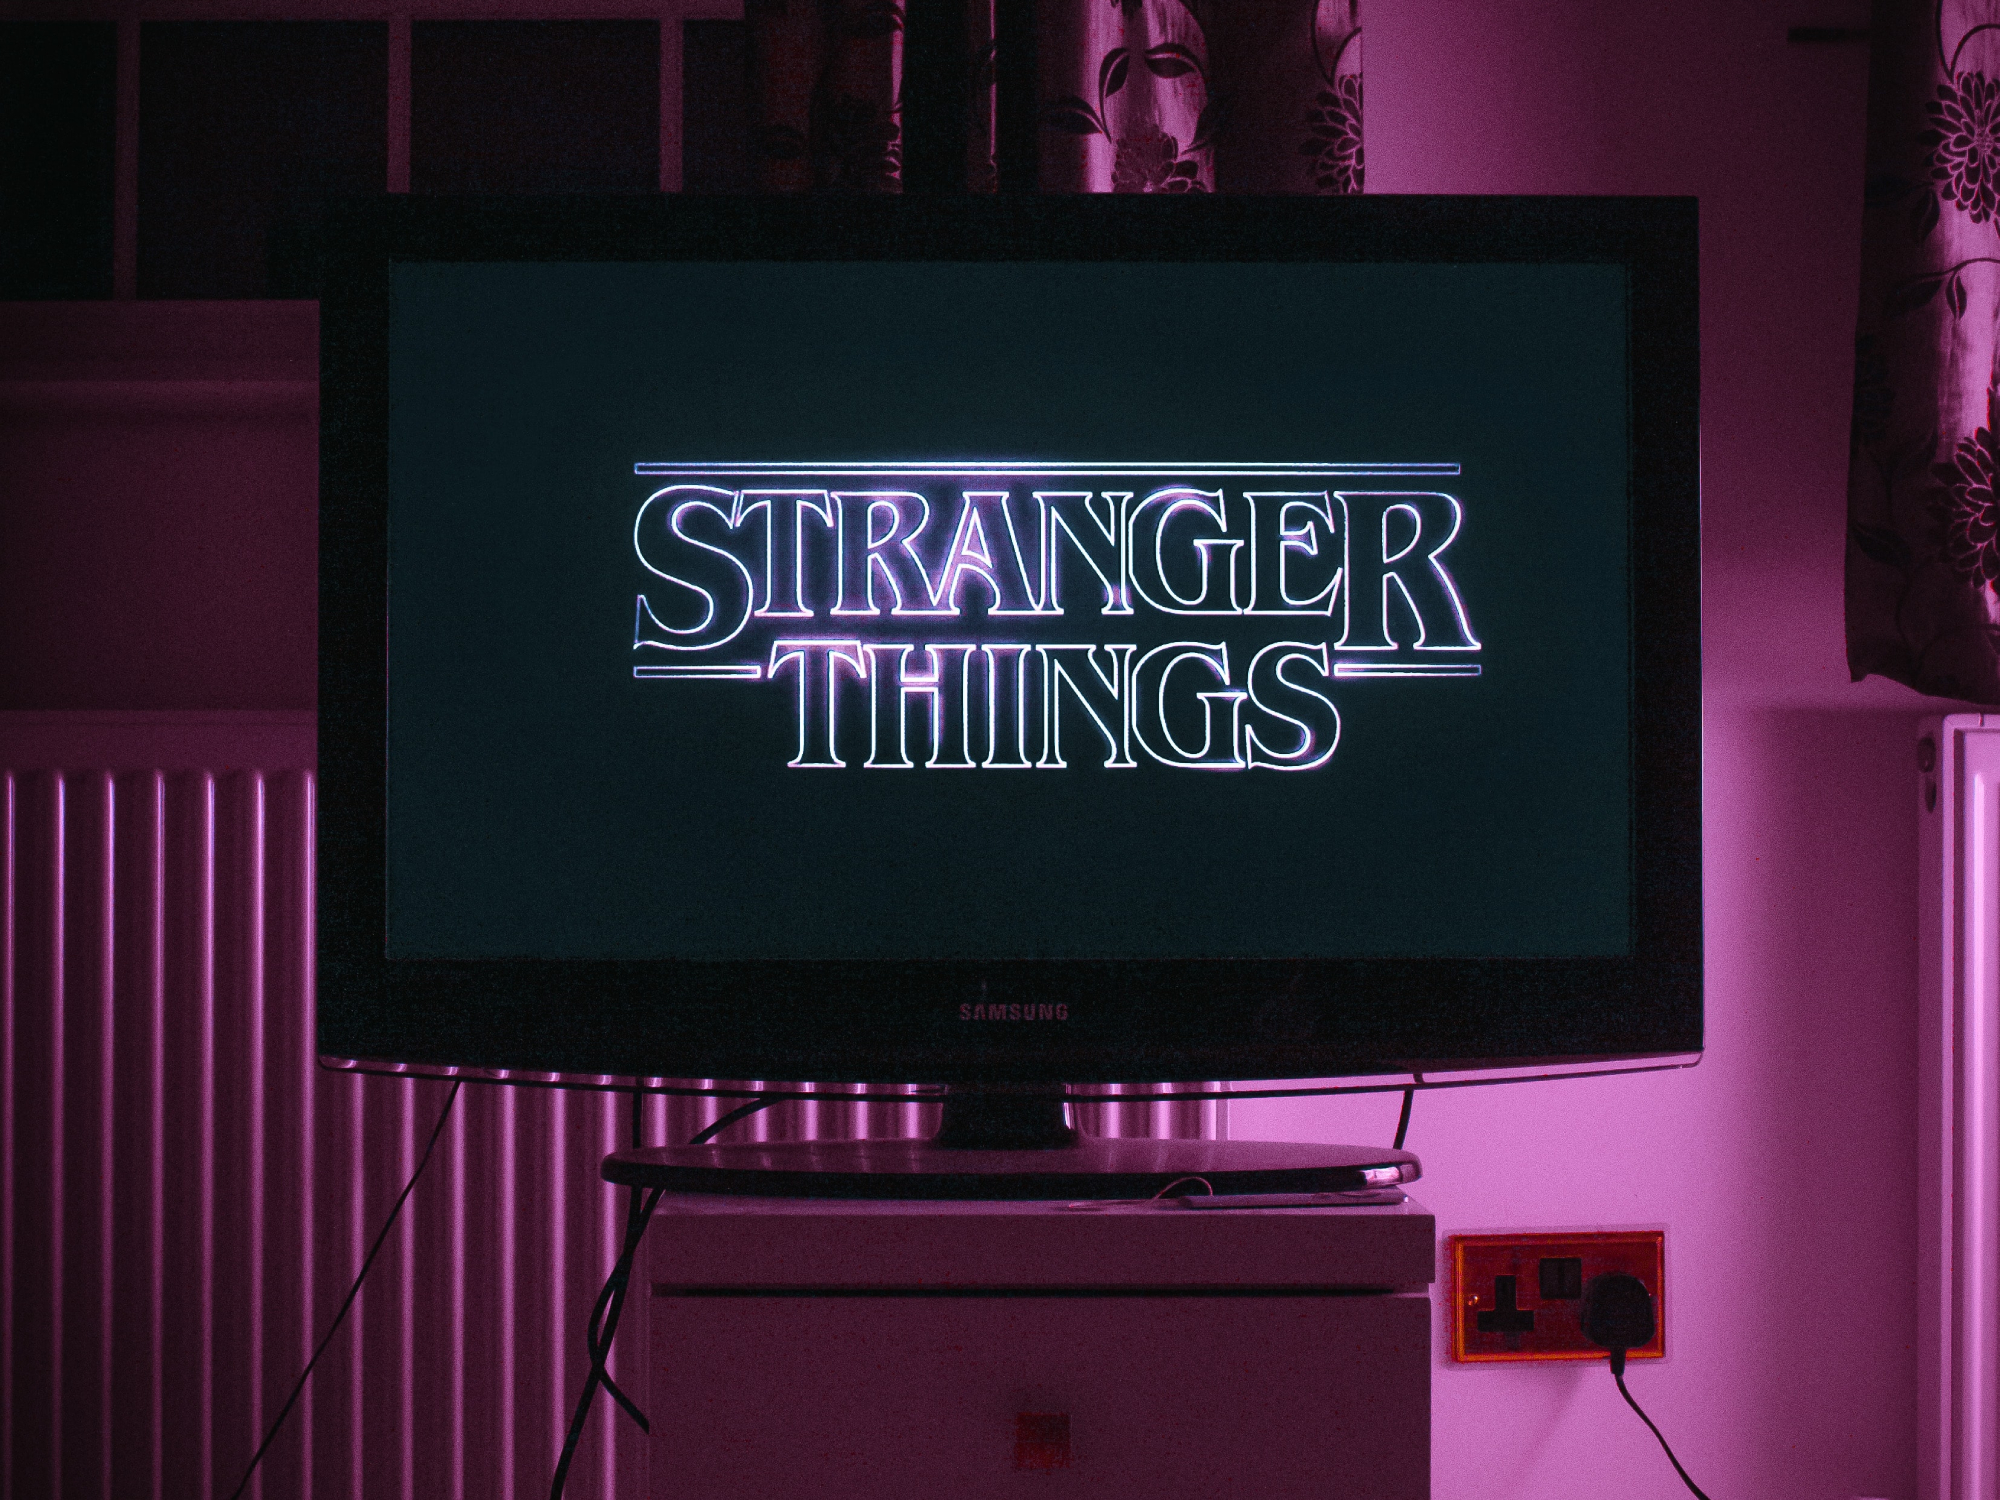 A TV with the Stranger Things title screen on it, in a dark room bathed in purple light. Exactly what you might see if you're binge-watching instead of going to sleep.